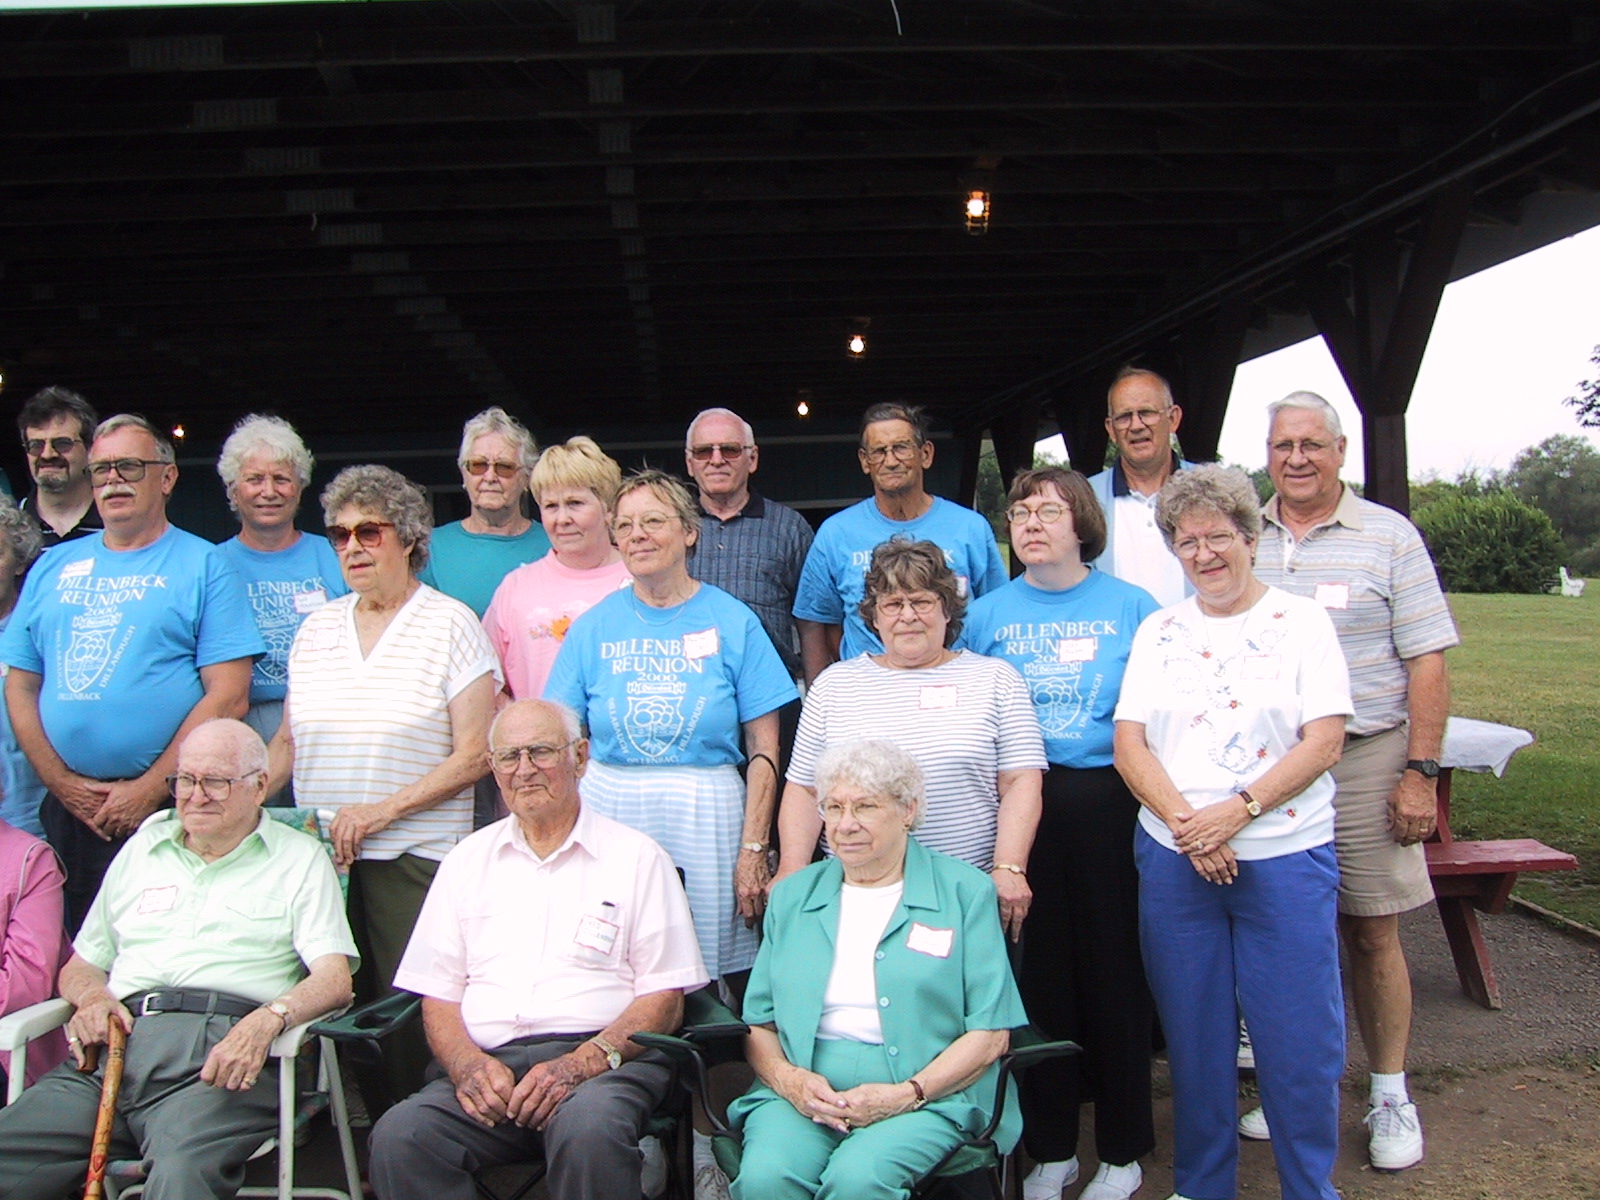 2001 - The 101st Dillenbeck Family Reunion (Right)